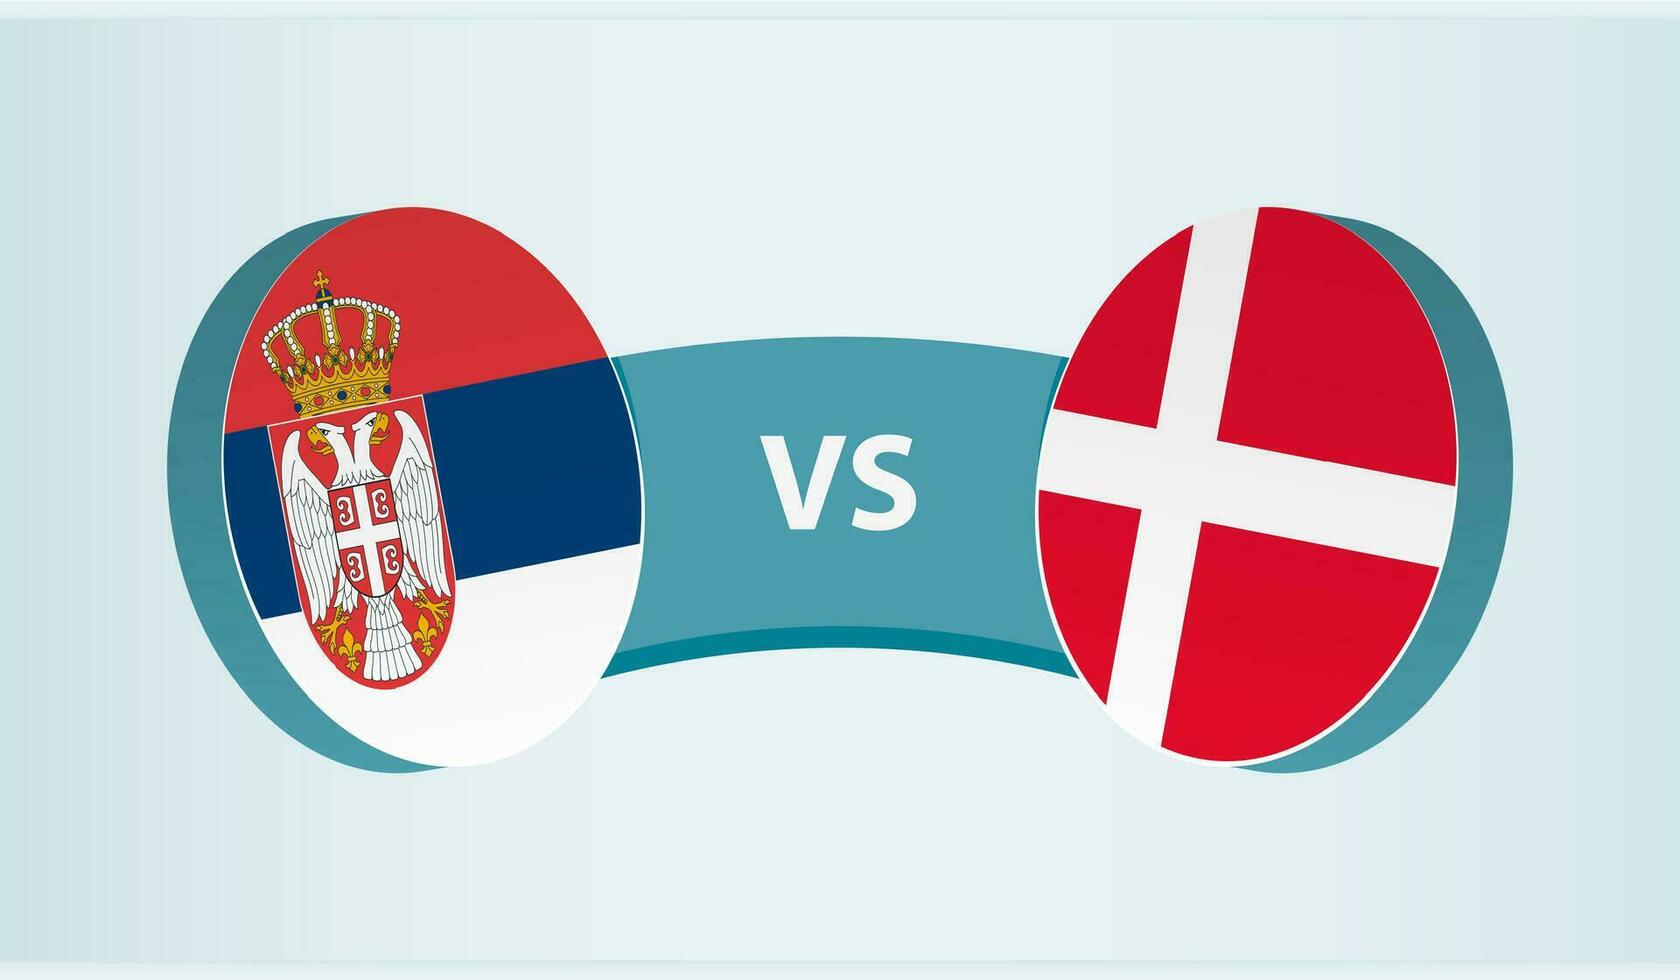 Serbia versus Denmark, team sports competition concept. vector